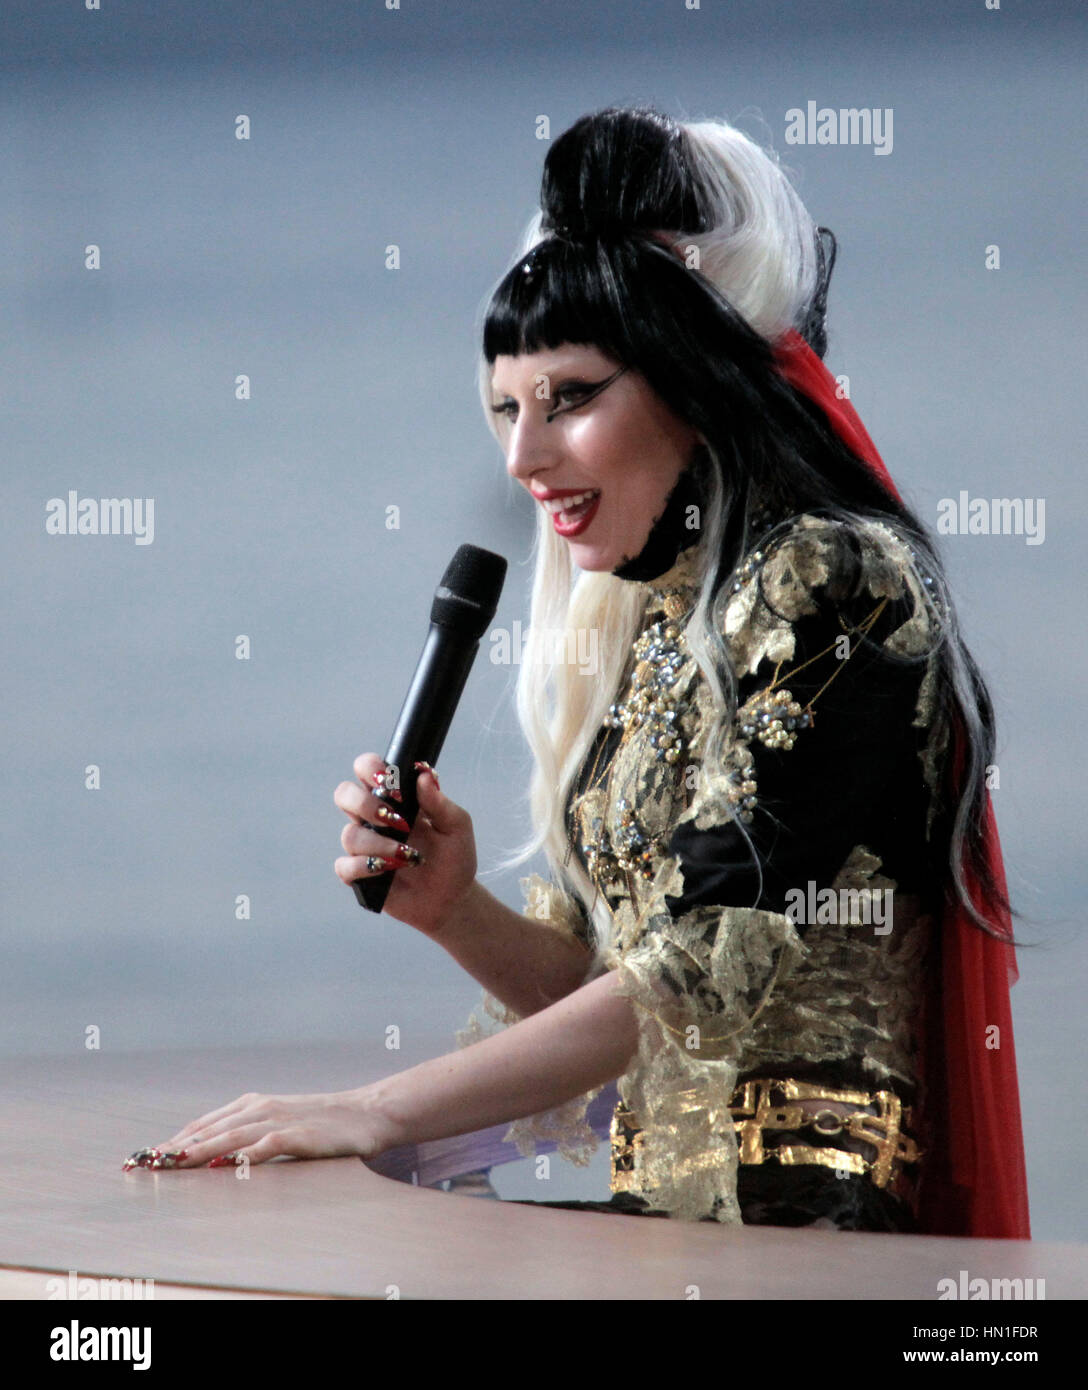 Lady Gaga performs during a television interview with French TV's Canal + Le Grand Journal at the Cannes Film Festival in Cannes, France on May 11, 2011. Photo by Francis Specker Stock Photo